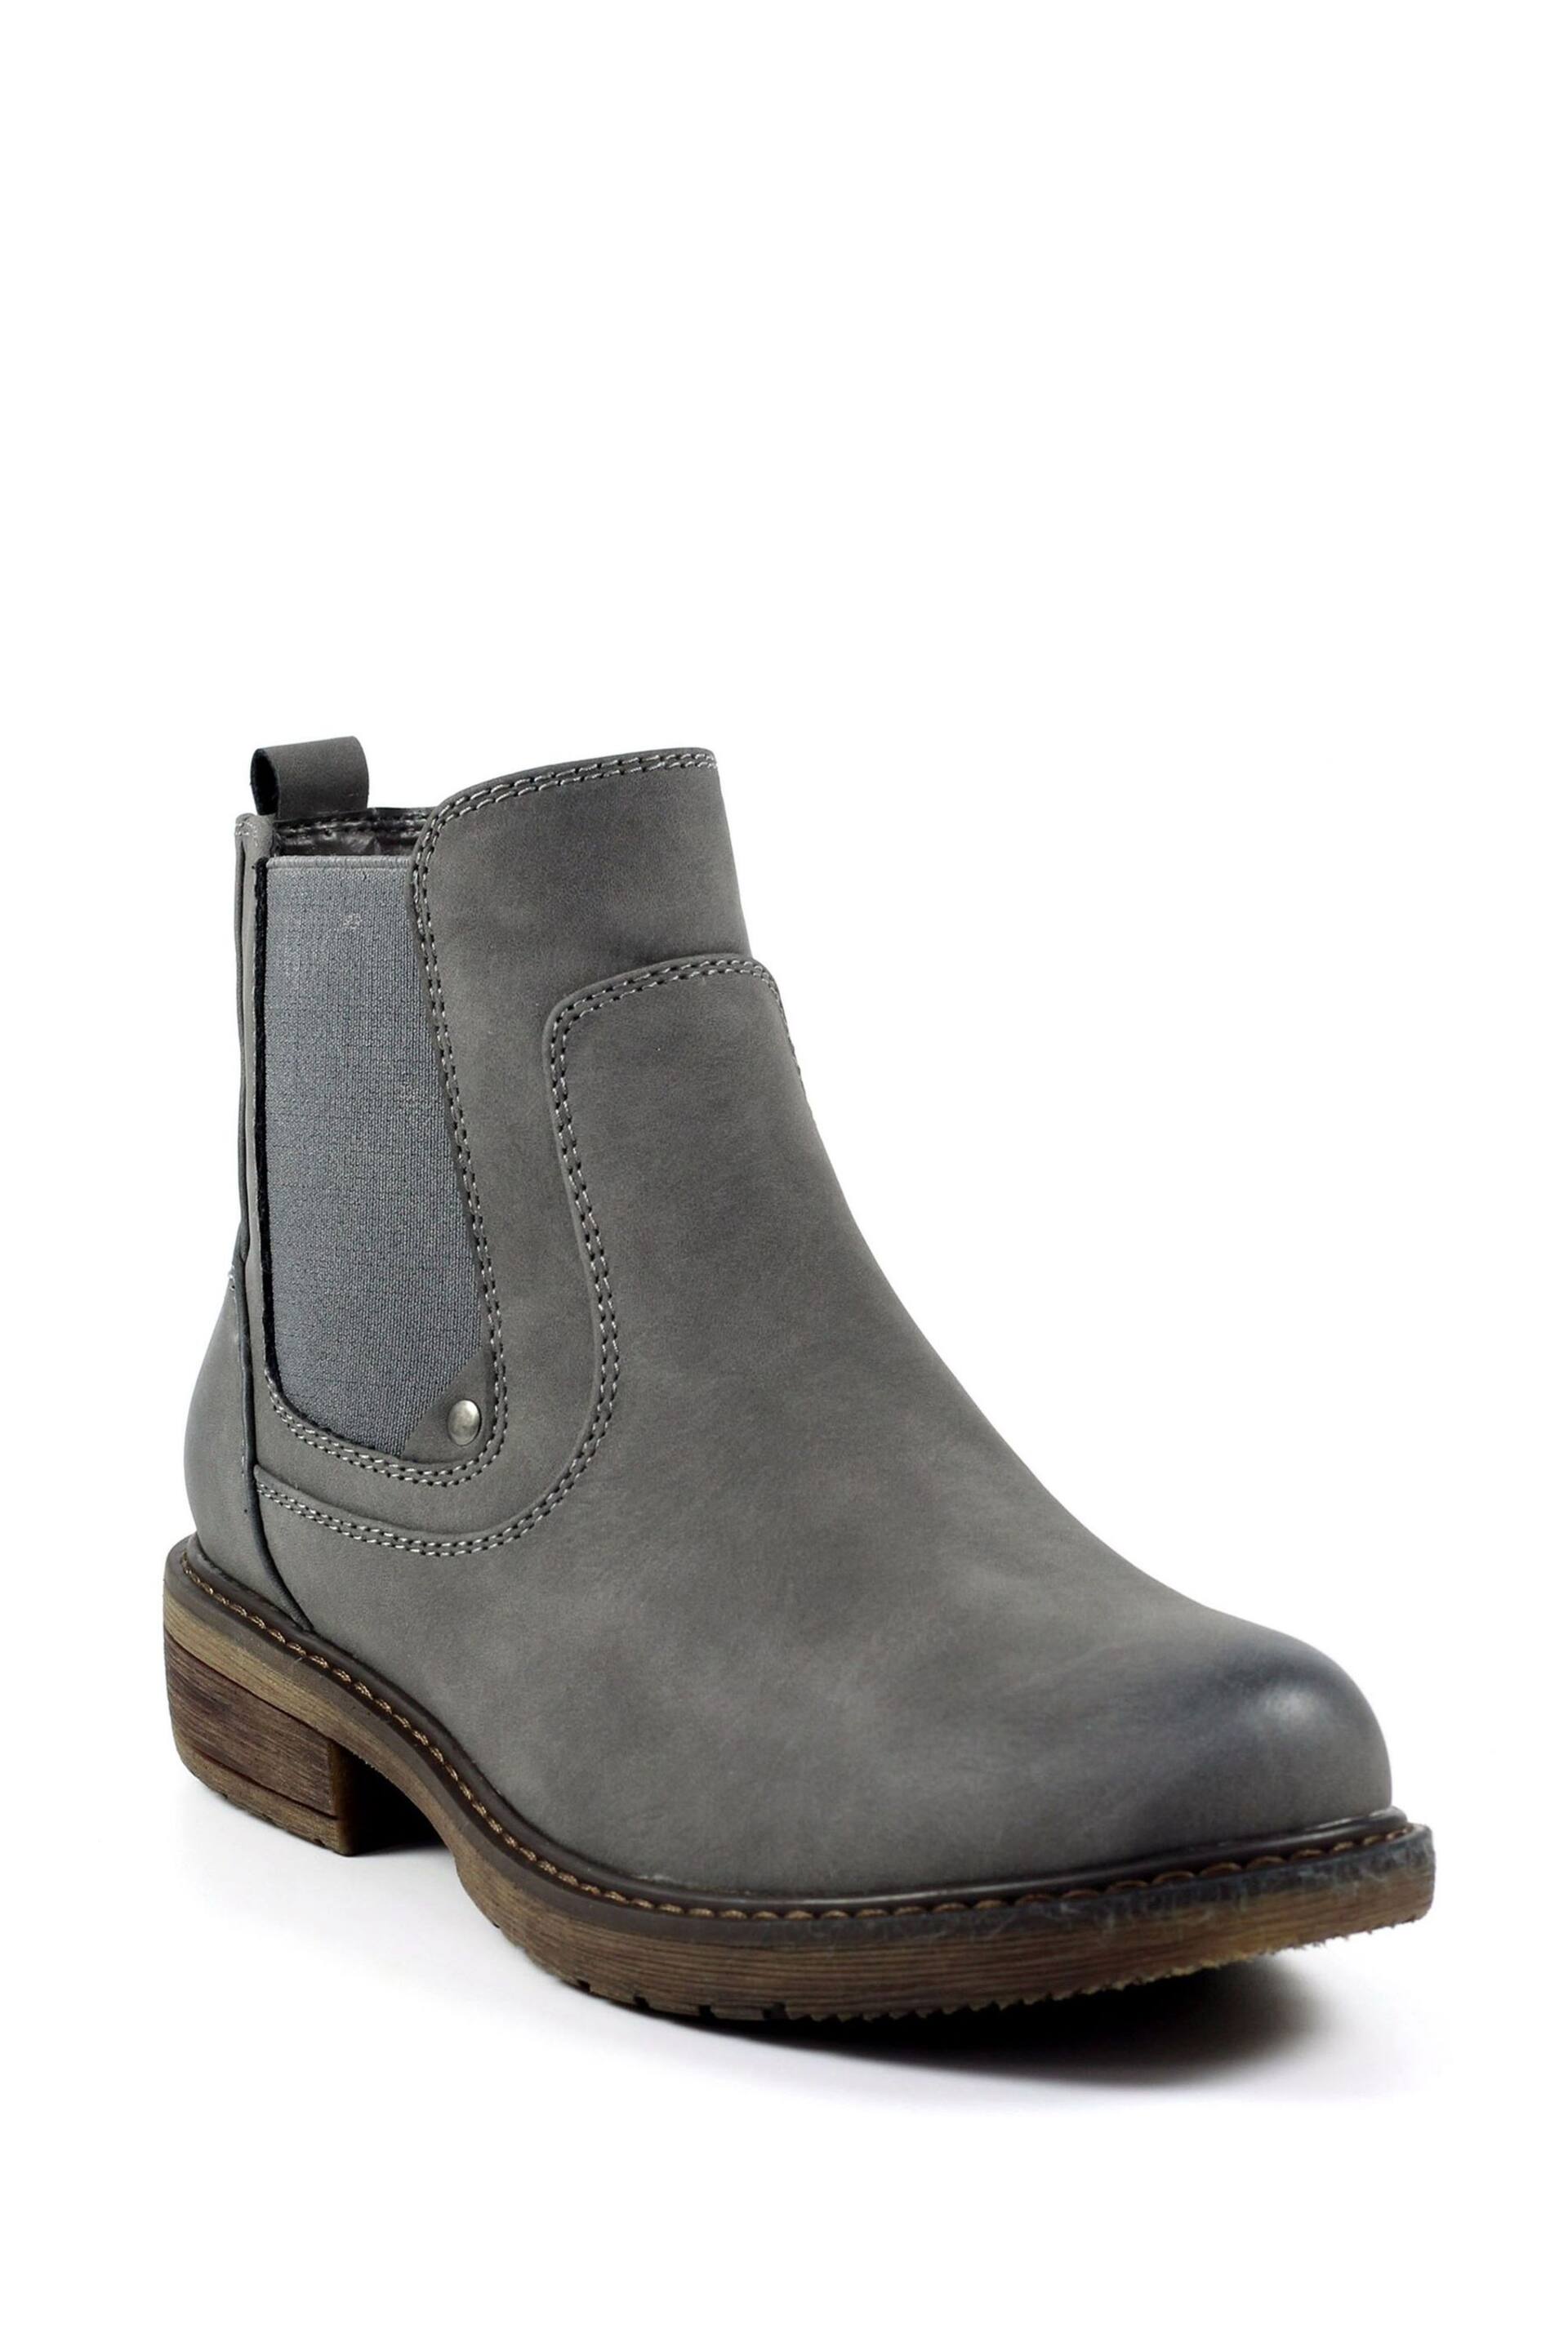 Lunar Roxie II Ankle Boots - Image 2 of 8